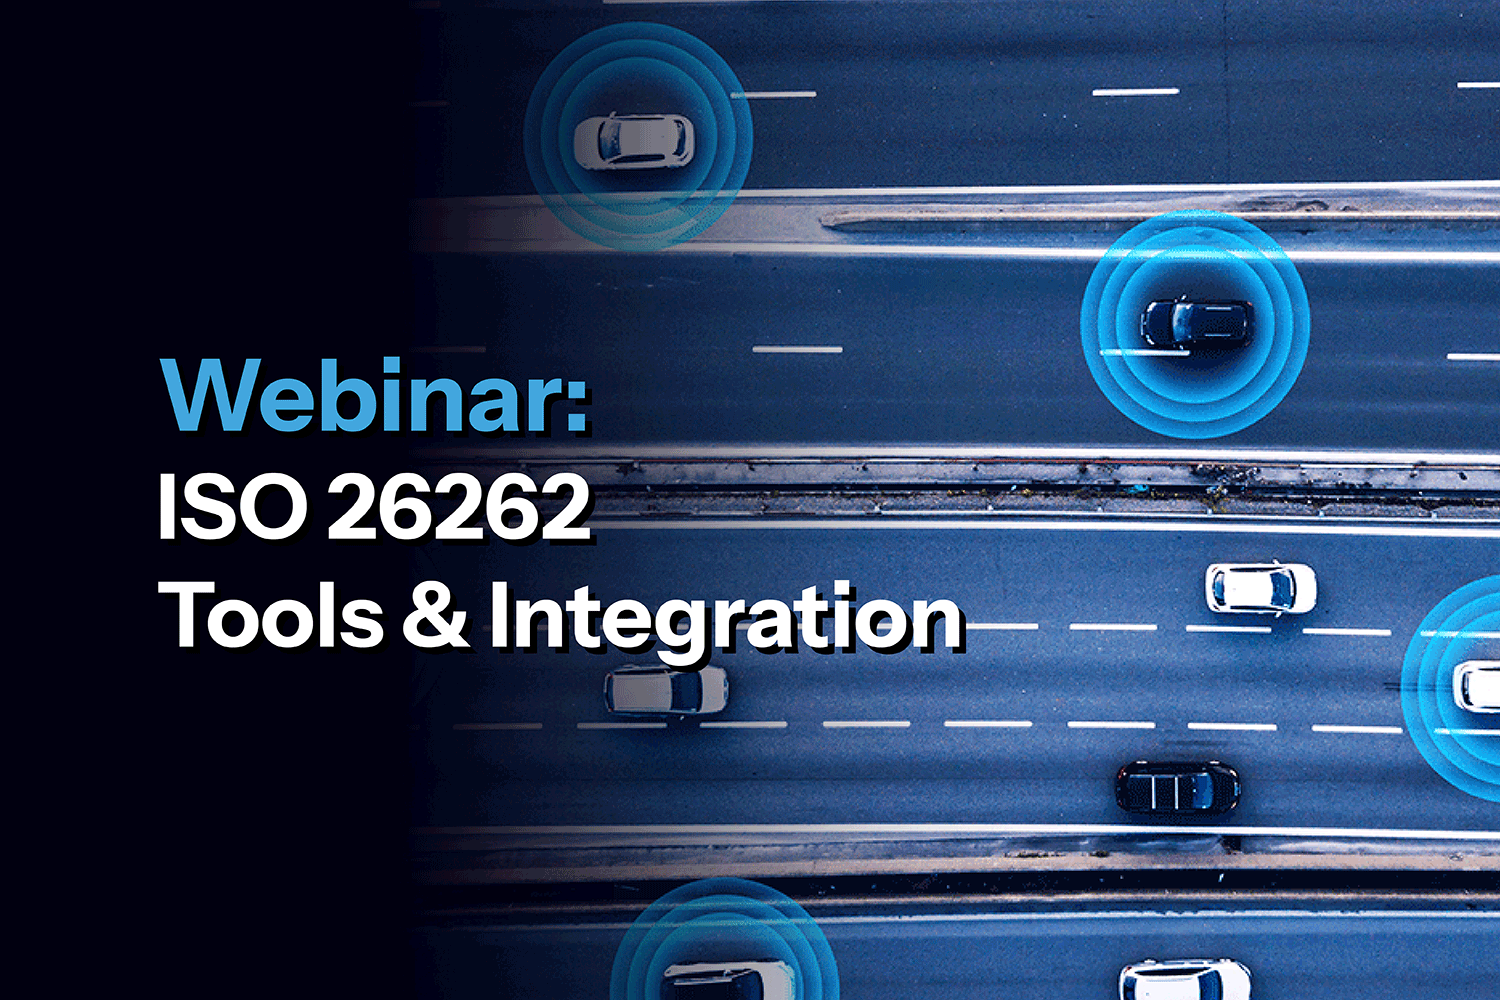 LSS-Knowledge-Center-Webinar-ISO 26262 Tools & Integration-Card-Images-01